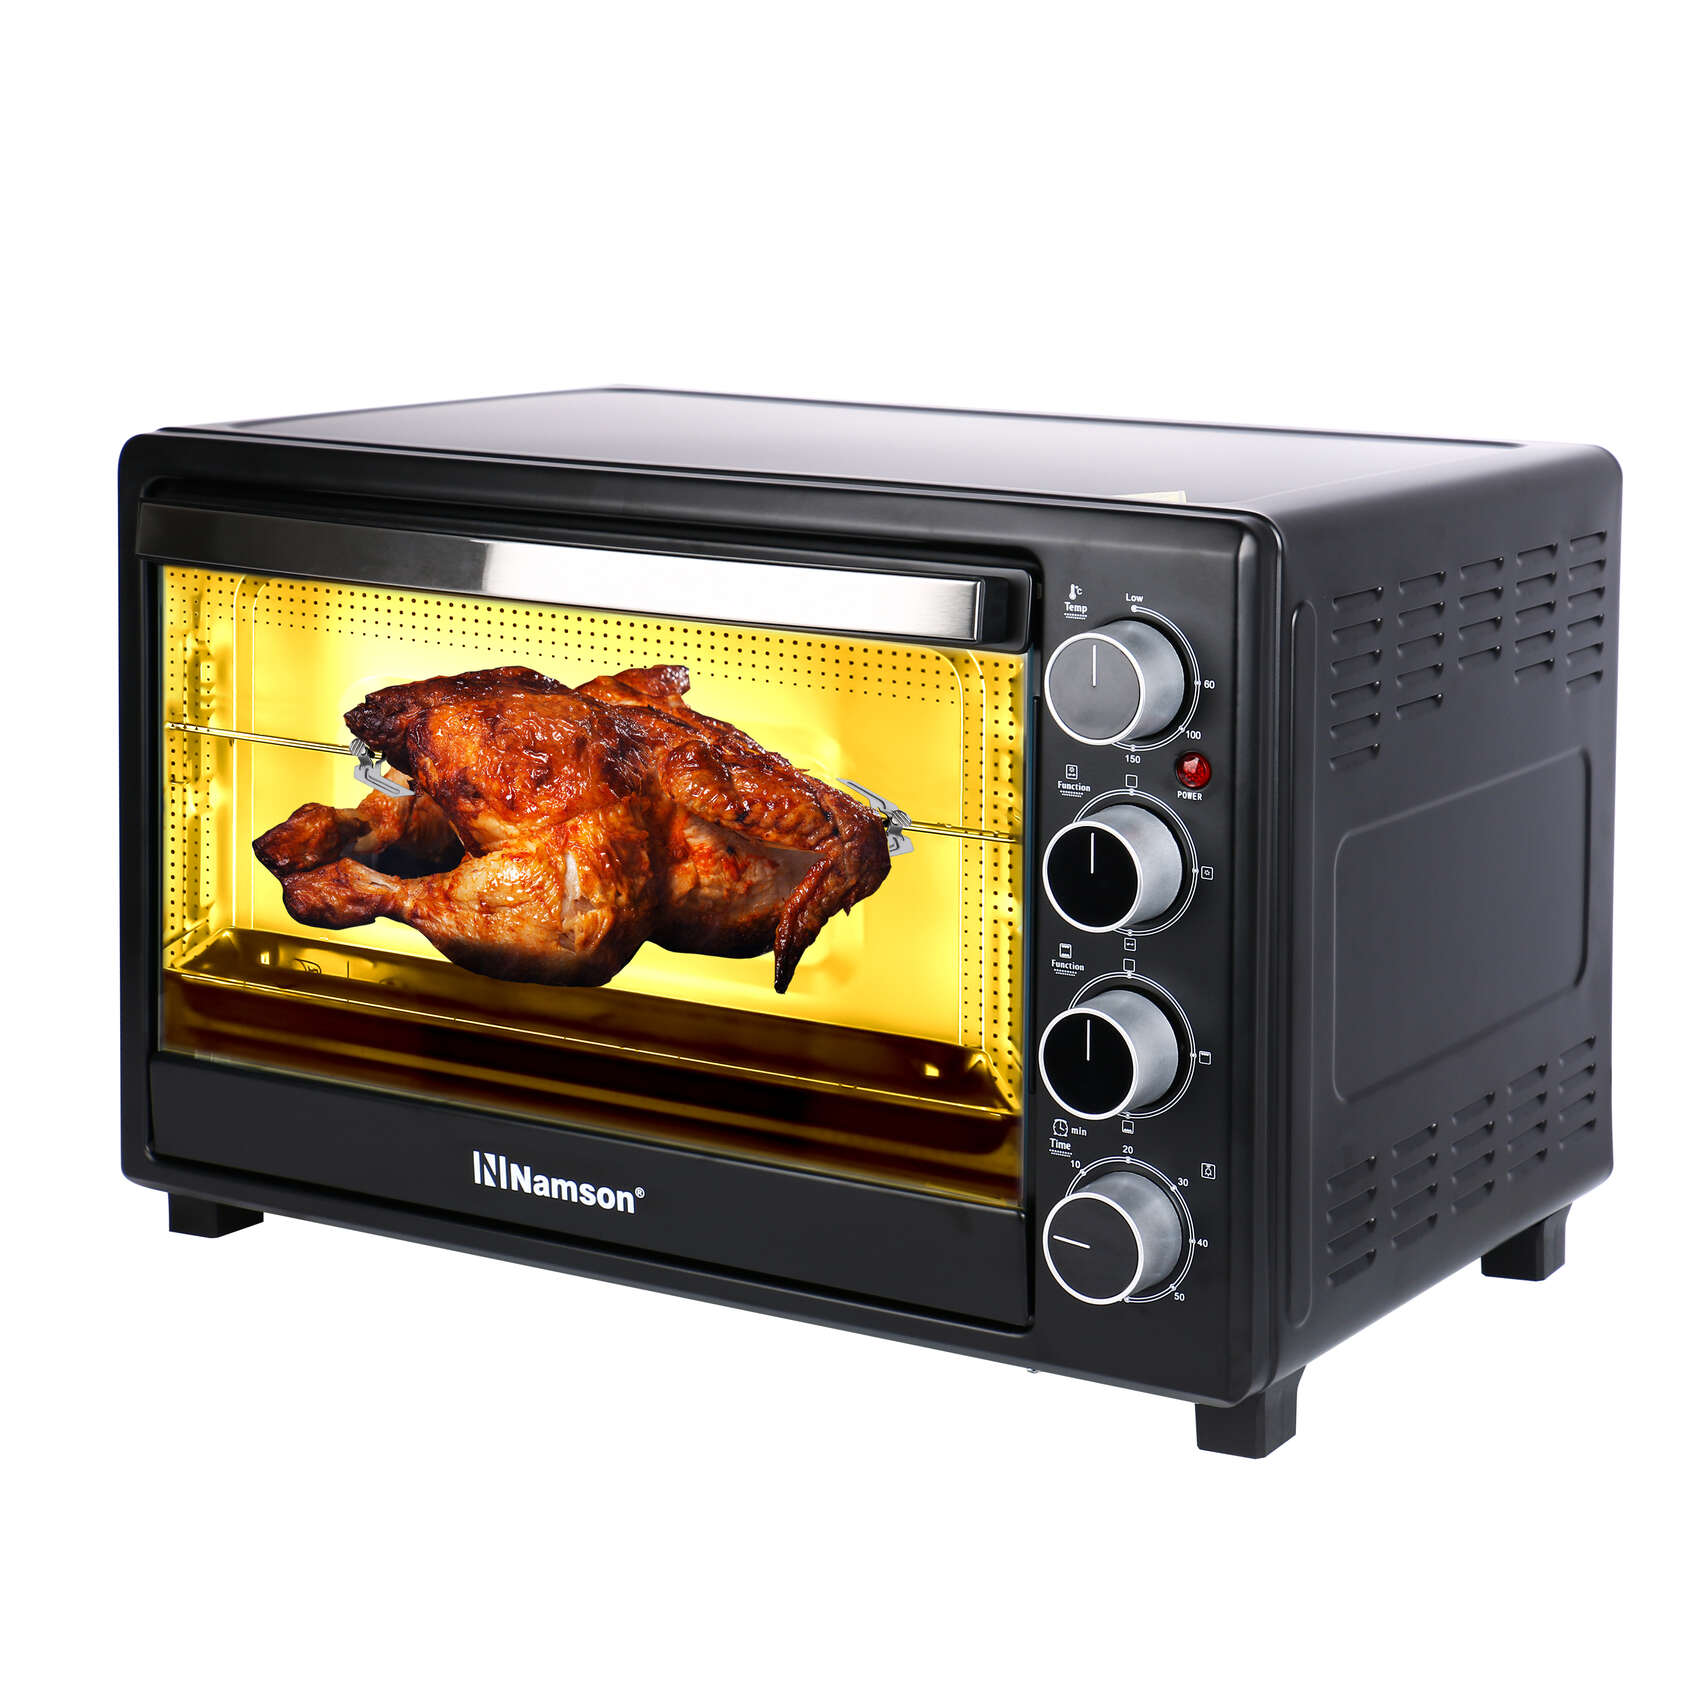 NAMSON MULTI-FUNCTIONAL ELECTRICAL OVEN 45L 9.9 KG 2000W NA-7864 WITH ROTATING FORK FOR GRILL CHICKEN | 4 KNOB CONTROL | 4 HEATING MODES | 60 MINUTES TIMER WITH BELL RING | INNER LAMP | HEAT RESISTANT GLASS DISPLAY | STEEL OIL COLLECTOR | MAXIMUM 230C TEMPERATOR REGULATOR 2 YEARS WARRANTY